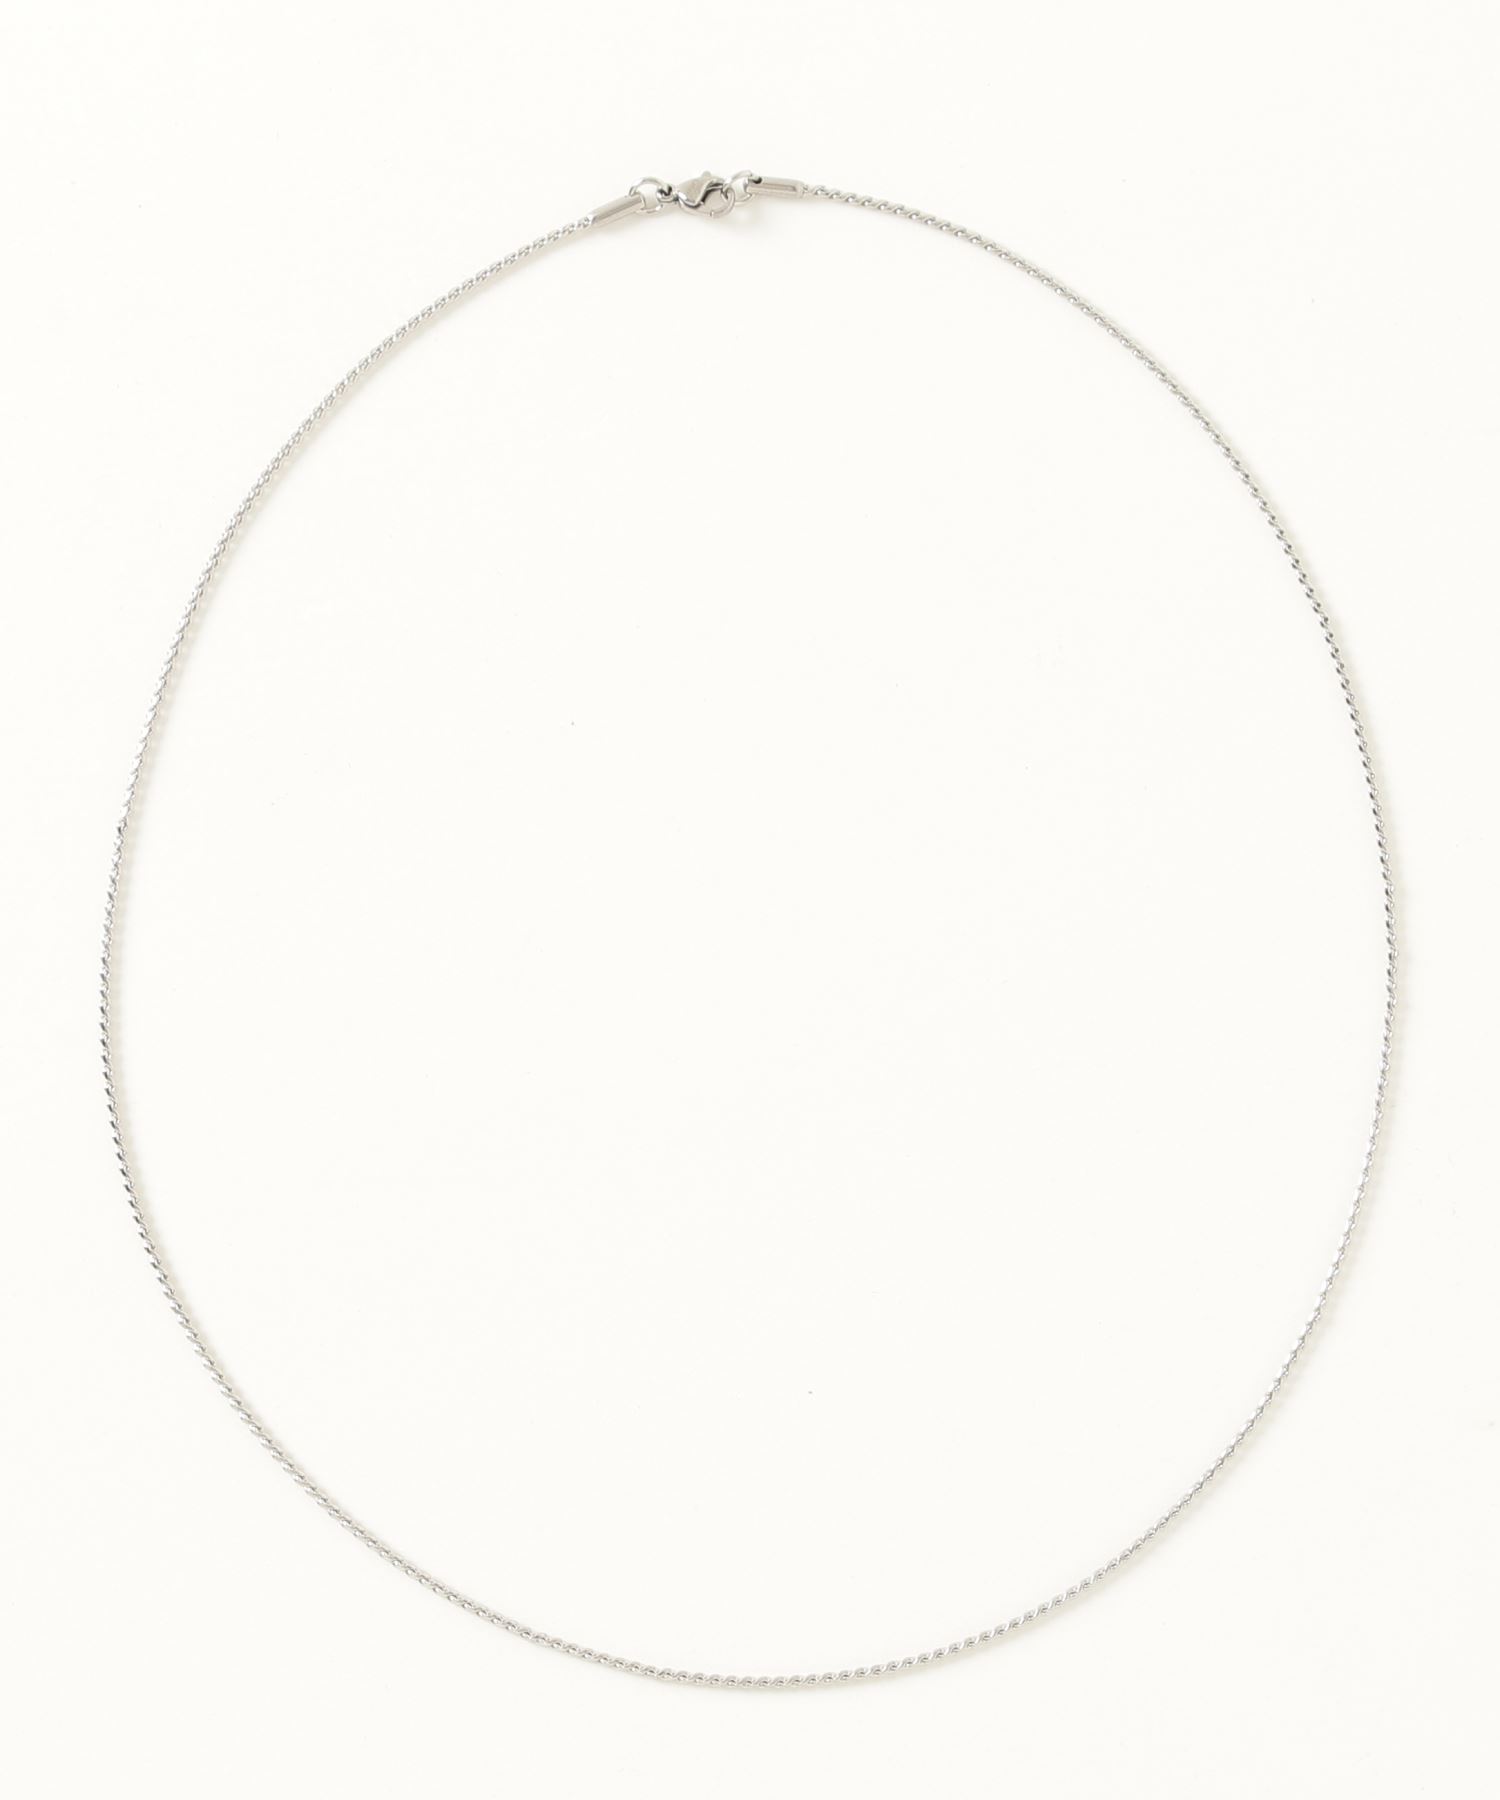 MAISON 激安☆超特価 mou ego na ghai エゴナハイ type1 chain ステンレスキヘイスウェッジチェーンネックレス stainless swage 買い誠実 necklacce